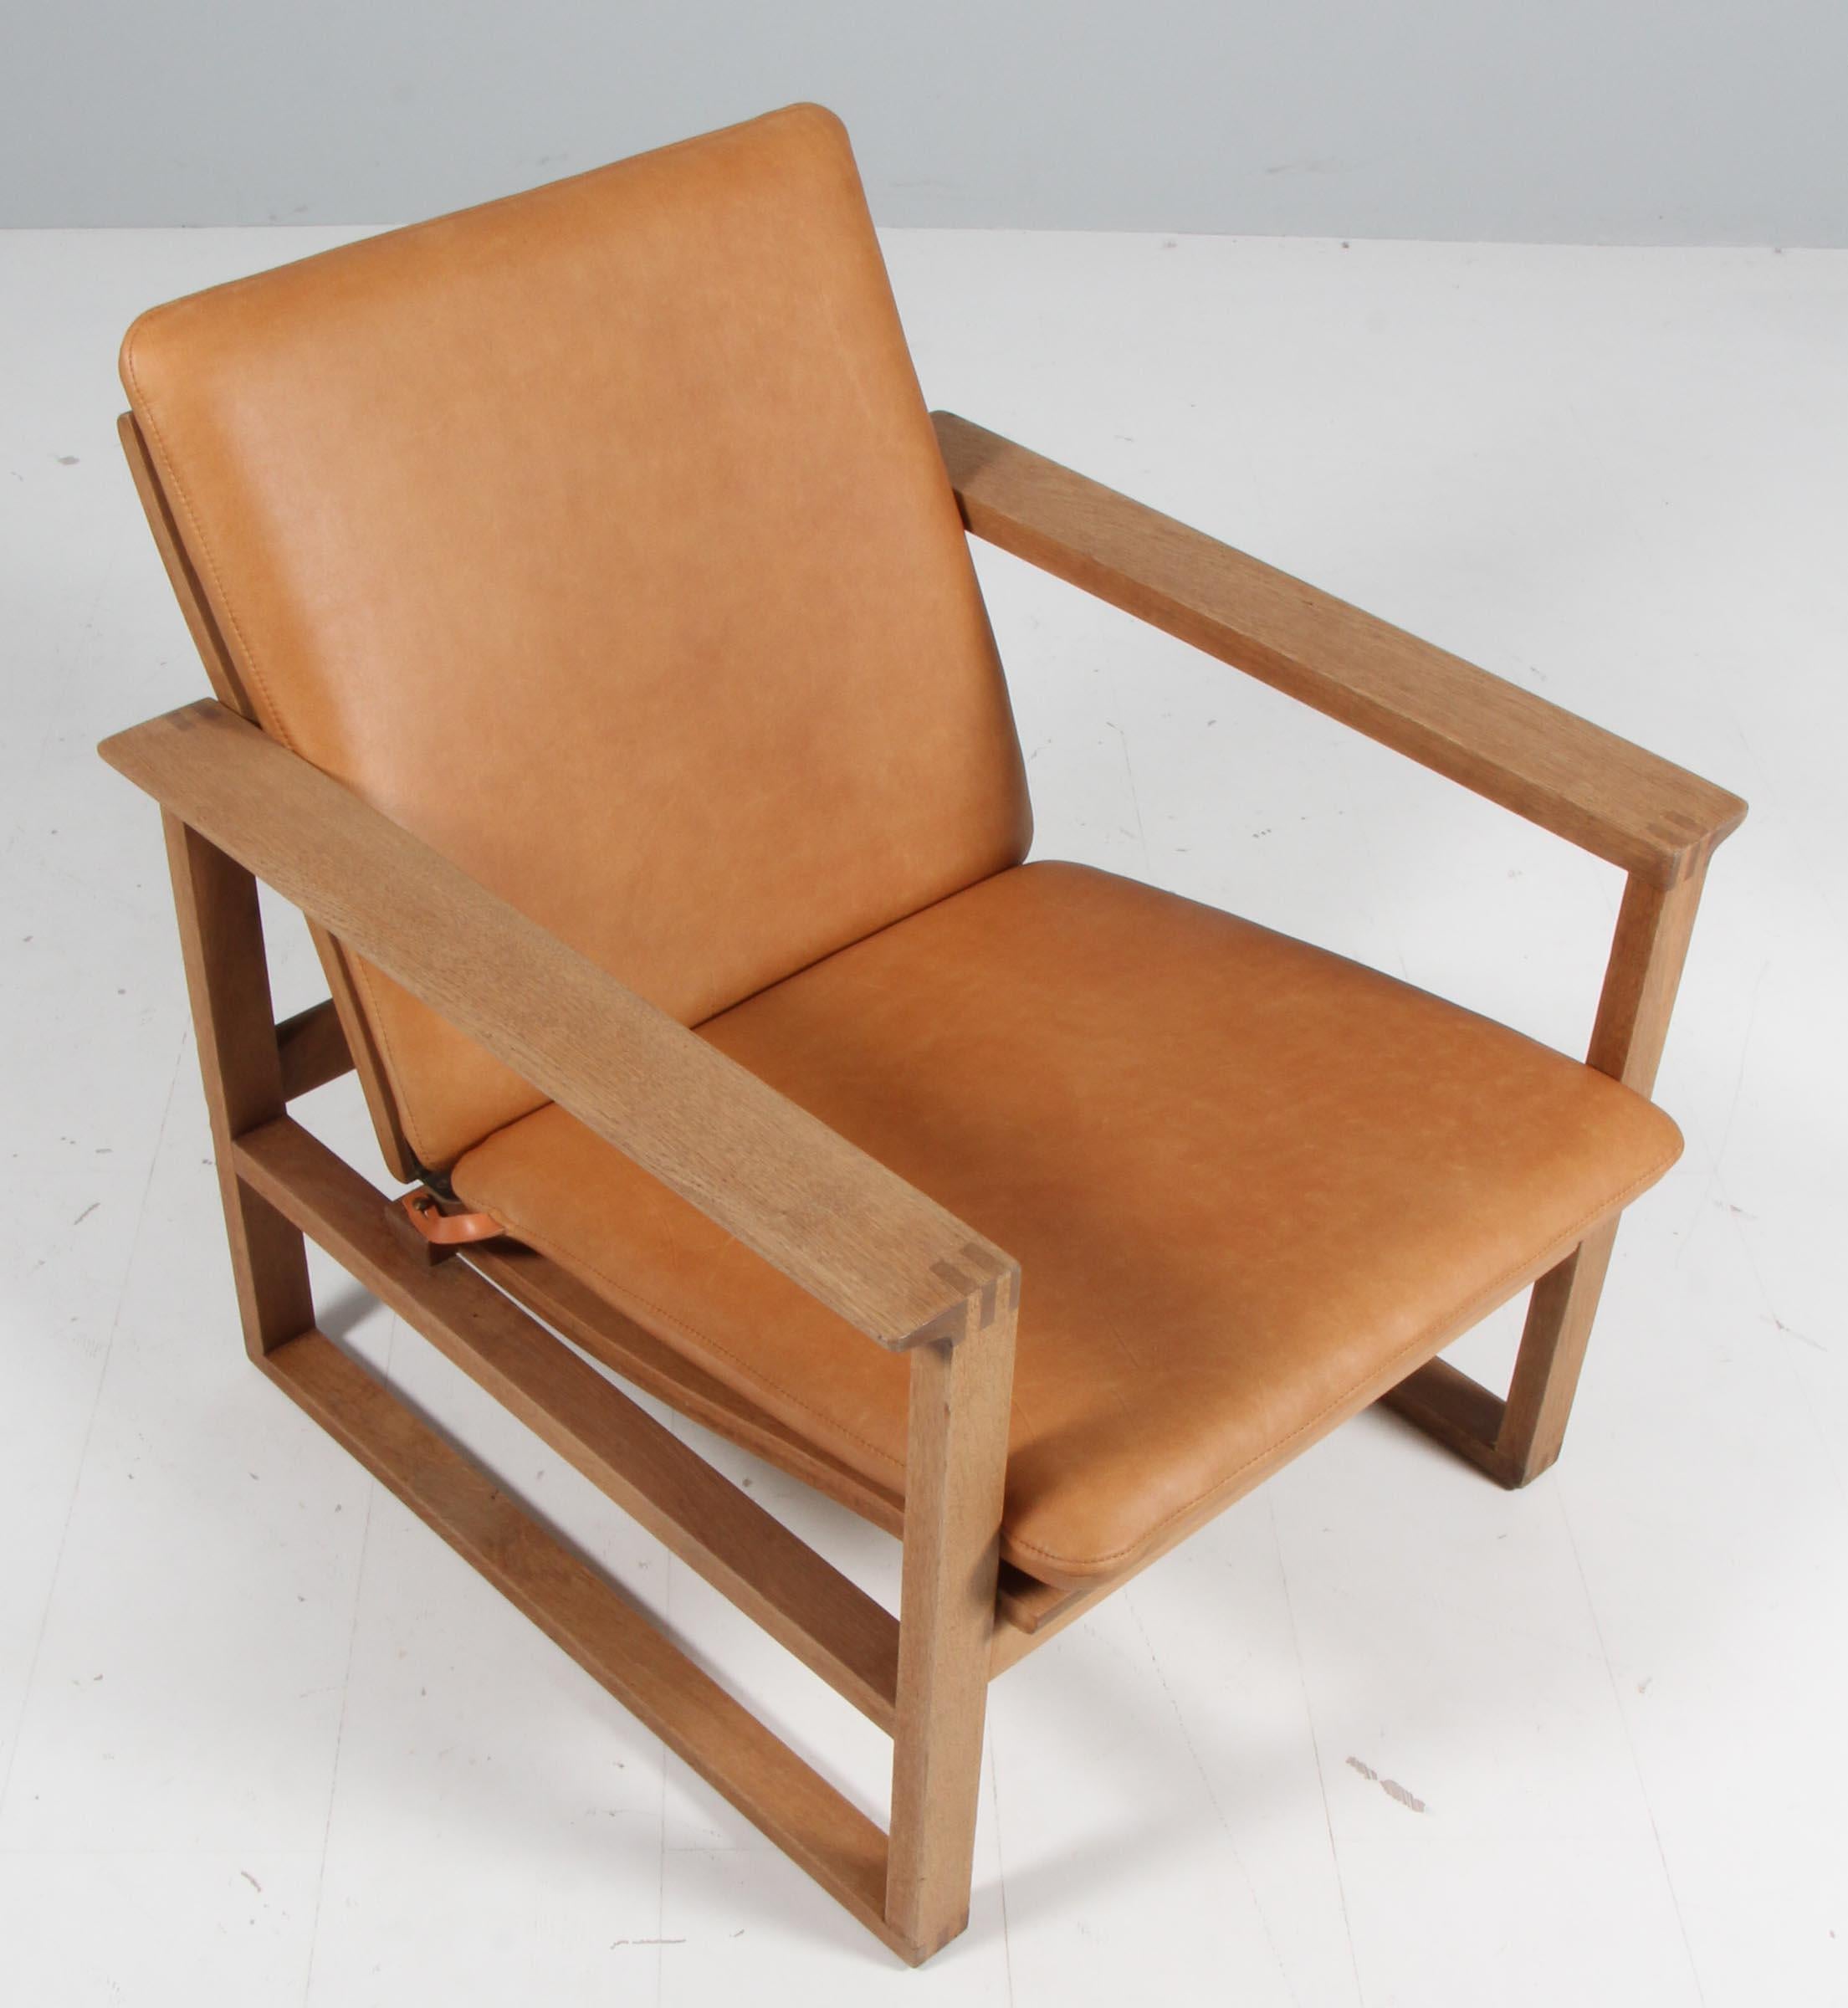 Børge Mogensen lounge chair new upholstered with vintage aniline leather.

Frame of soap treated oak.

Model 2256, made by Fredericia furniture.